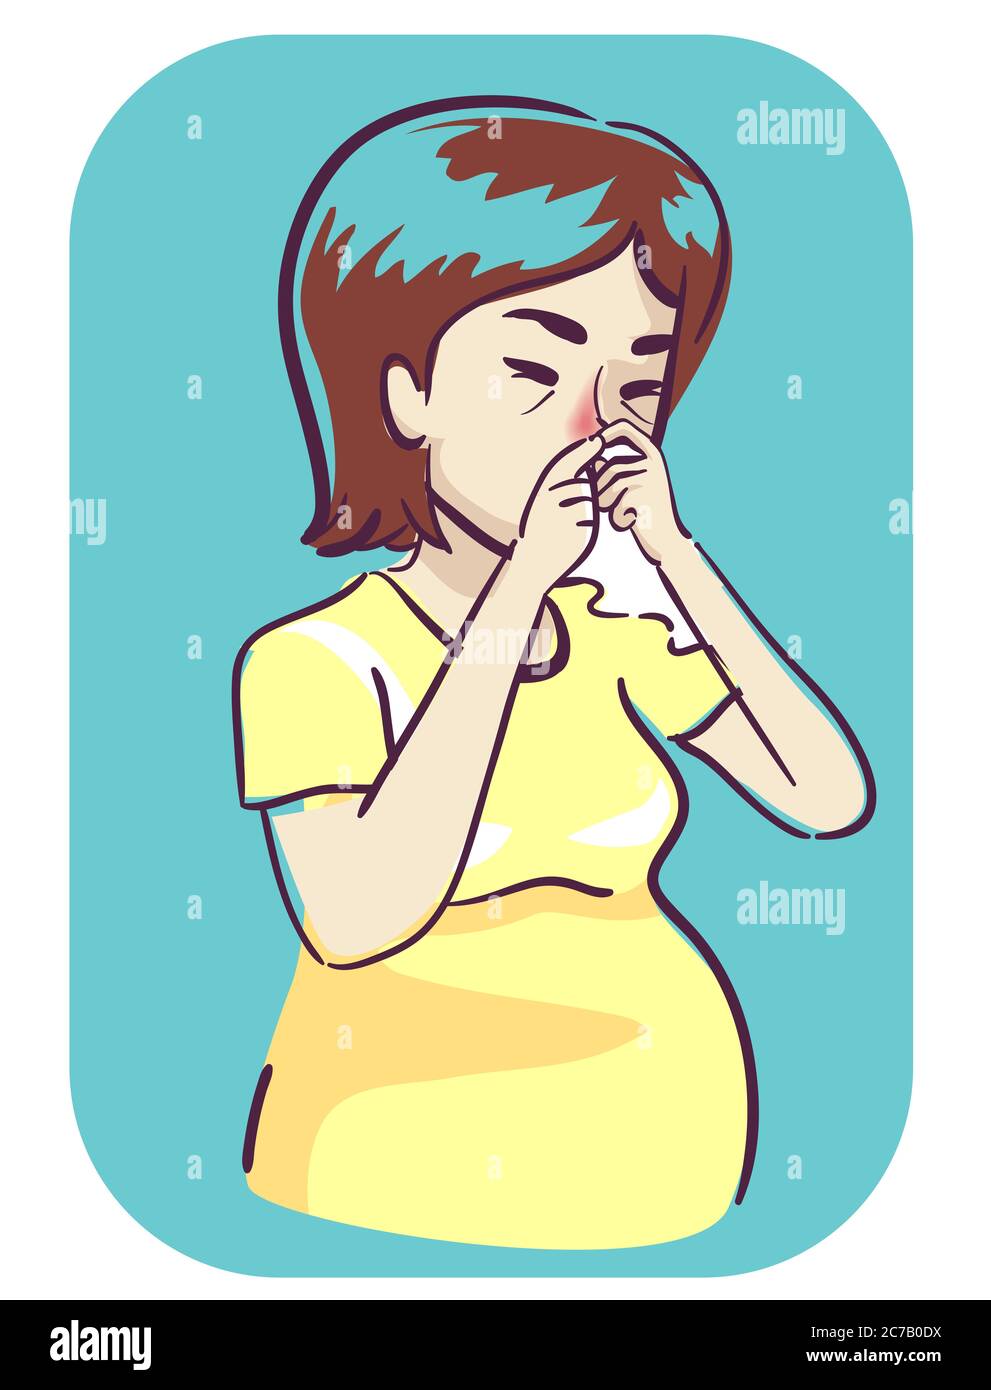 Illustration of a Girl Pregnant with Stuffy Nose Stock Photo